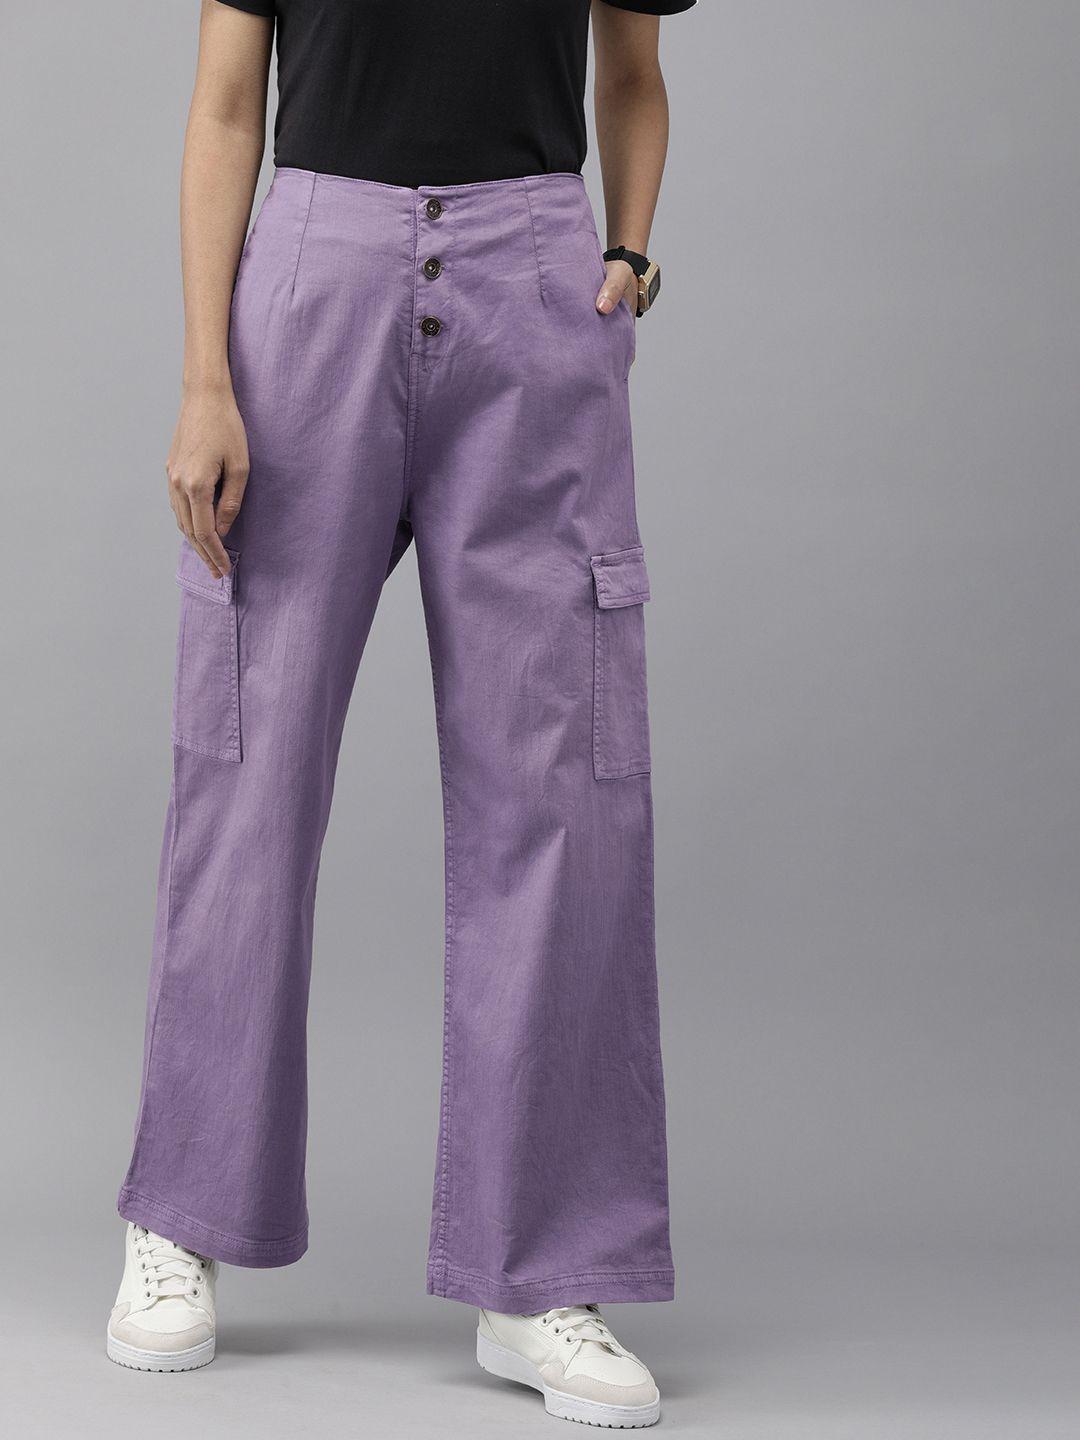 the roadster lifestyle co women purple straight fit high-rise cargos trousers